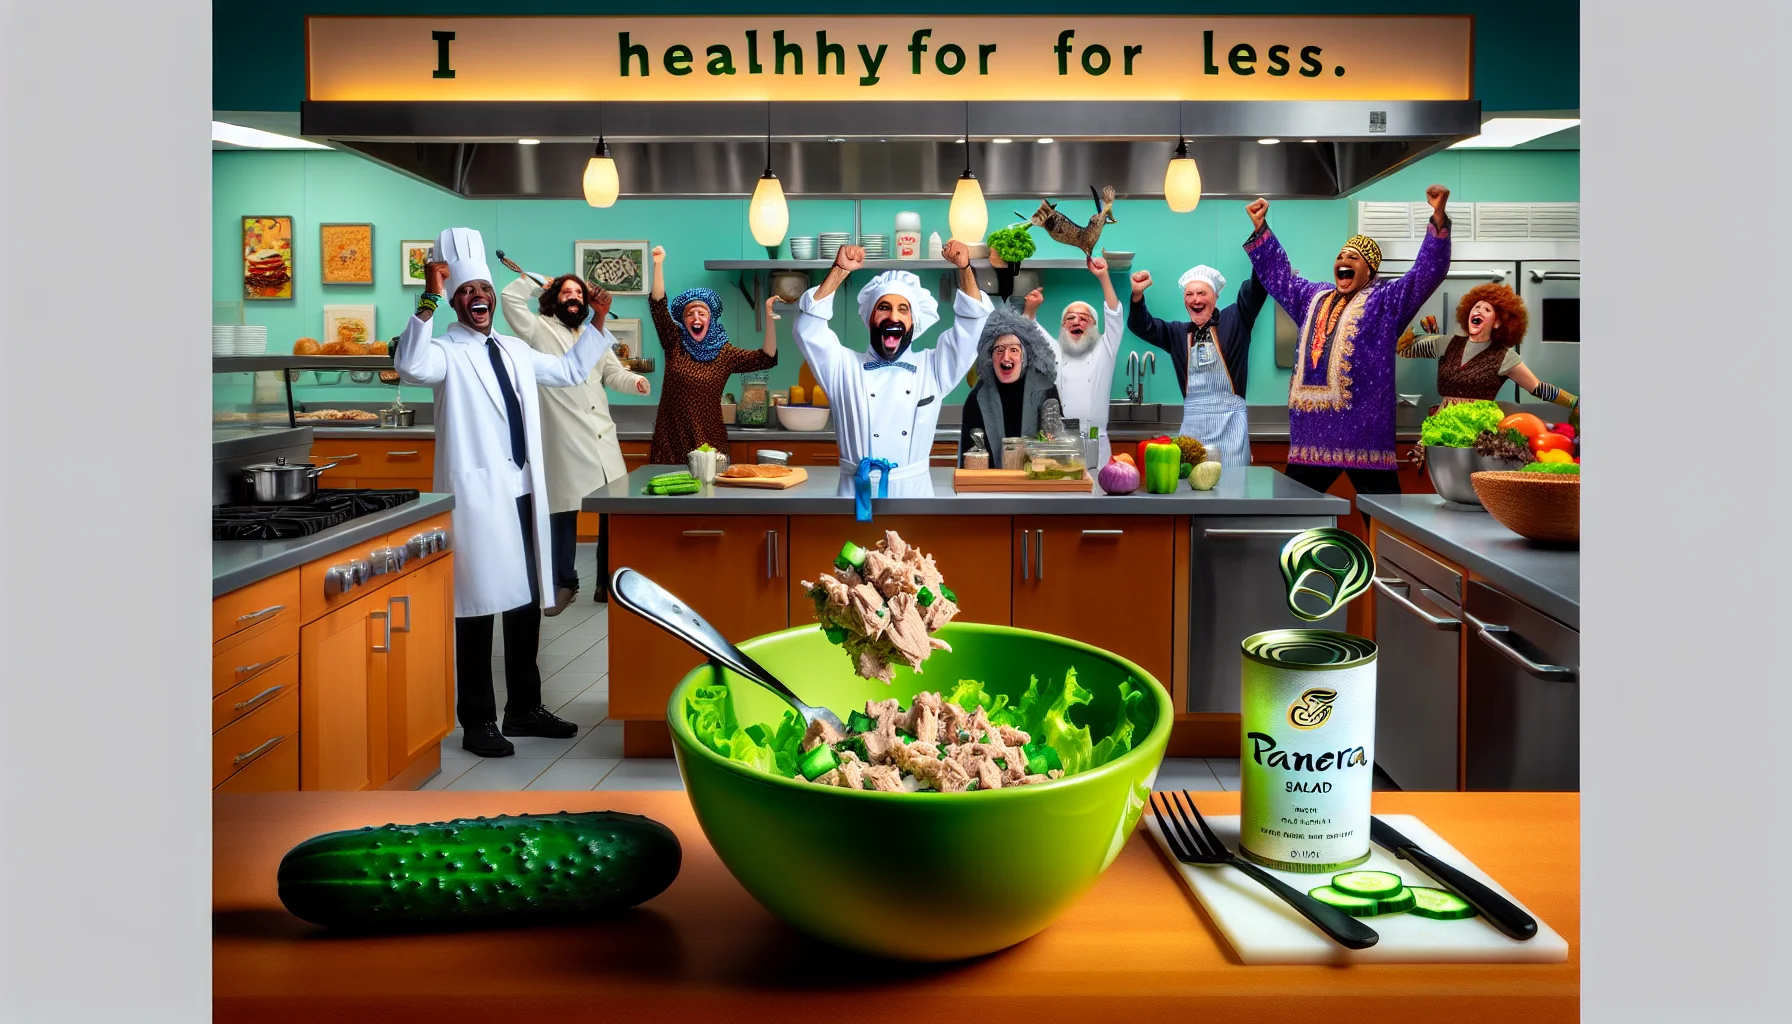 A humorous and enticing scene featuring the preparation of a Panera-inspired tuna salad. The kitchen is bustling with activity: utensils are dancing, and ingredients are jumping into a vibrant bowl on their own accord. The lettuce is doing somersaults, the cucumber doing a pirouette, and the can of tuna is shaking itself open, its contents leaping out joyously. On the counter, a sign reads 'Eat Healthy for Less,'. In the background, two costumed individuals, a Caucasian man dressed like a dollar bill and a Middle Eastern woman holding a sign that reads 'I Love Healthy Food,' are cheering on the show, celebrating affordable and nutritious choices.